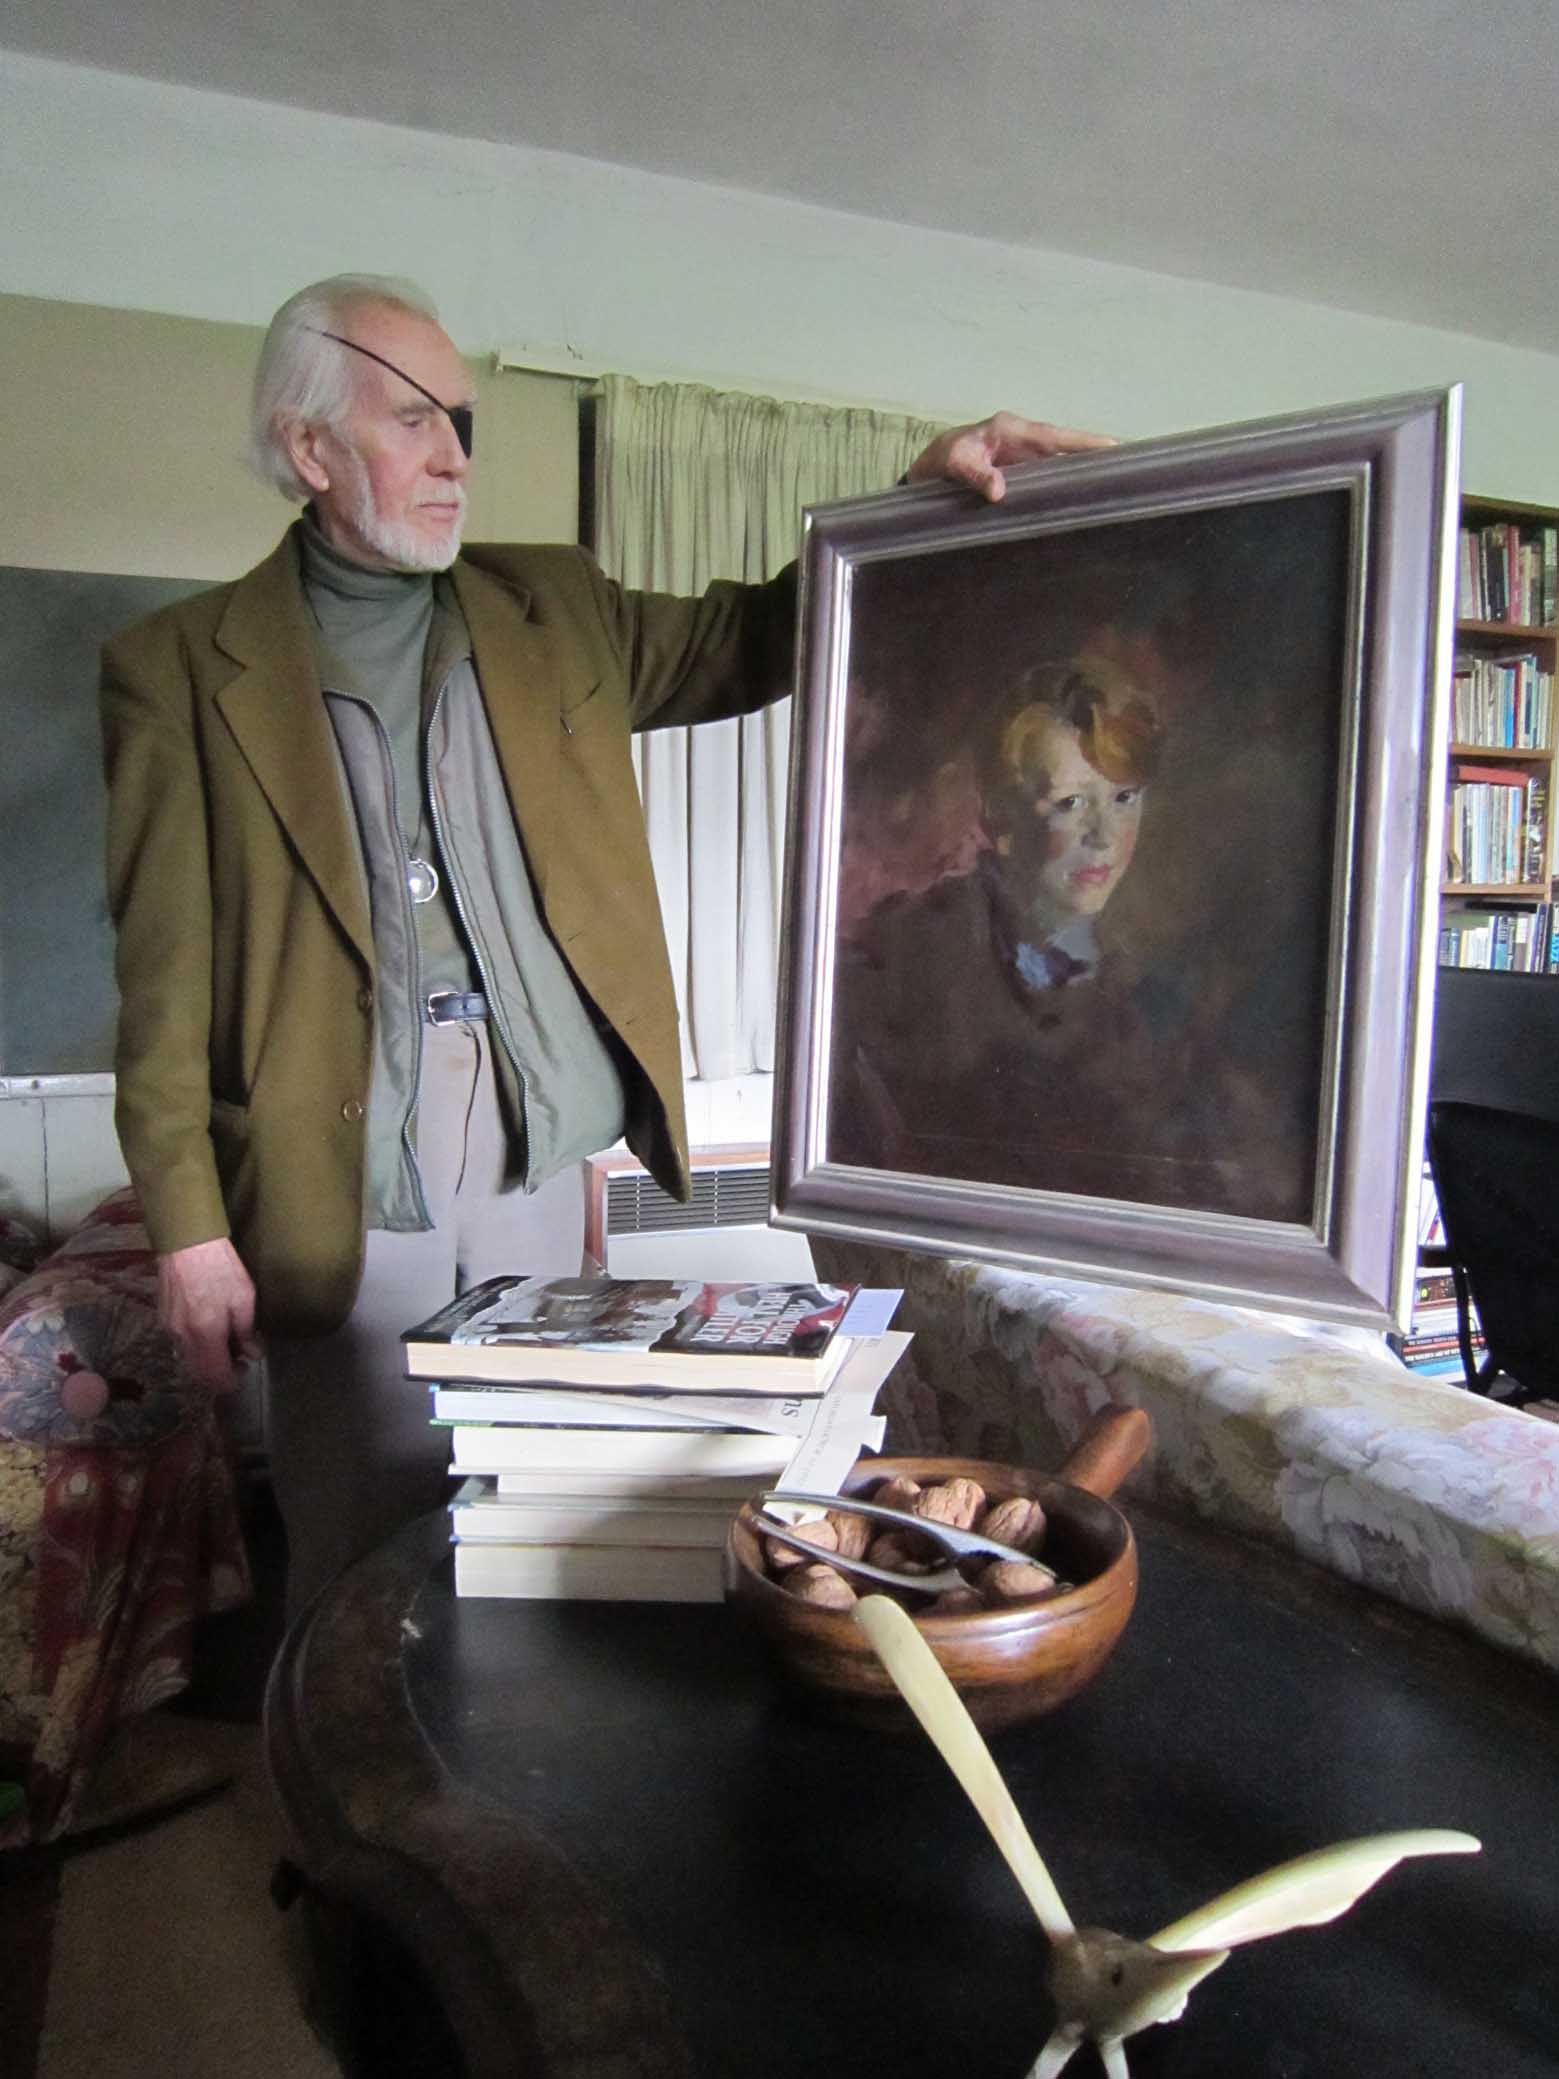 Frederick Deane at home, 2014. Image courtesy of Kerstin Doble.